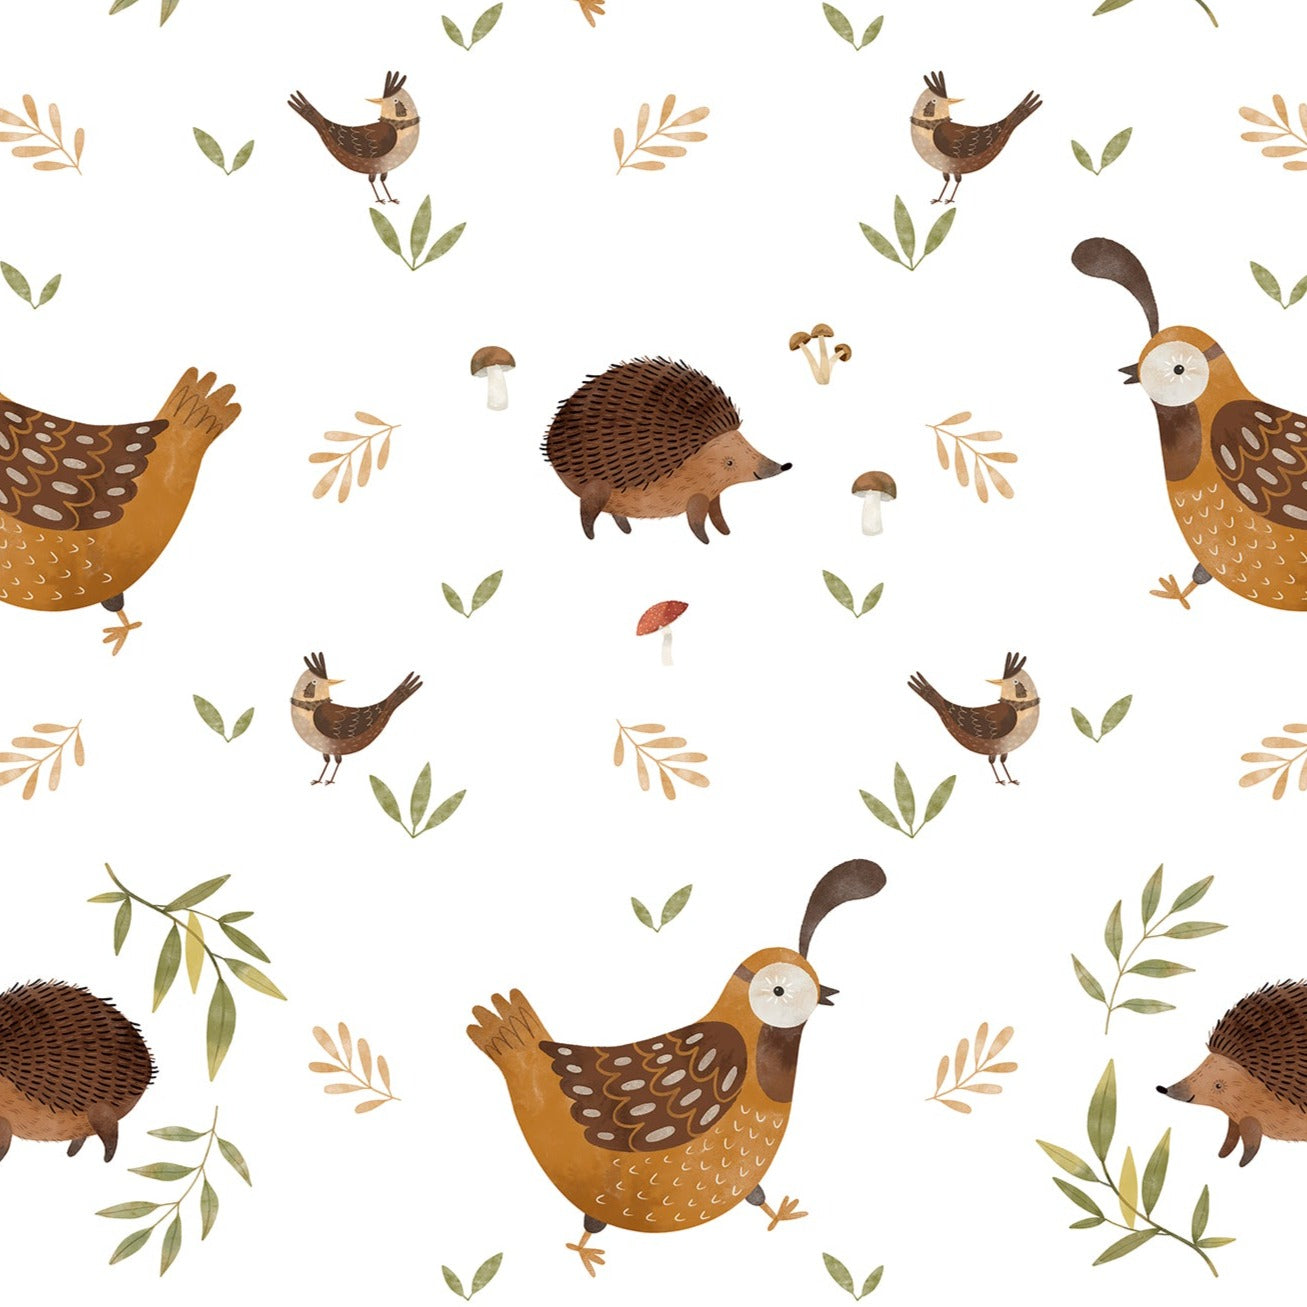 Close-up of Forest Hen Wallpaper featuring playful illustrations of brown hens, hedgehogs, and small birds amidst leaves and mushrooms on a white background, ideal for a natural and charming interior decor